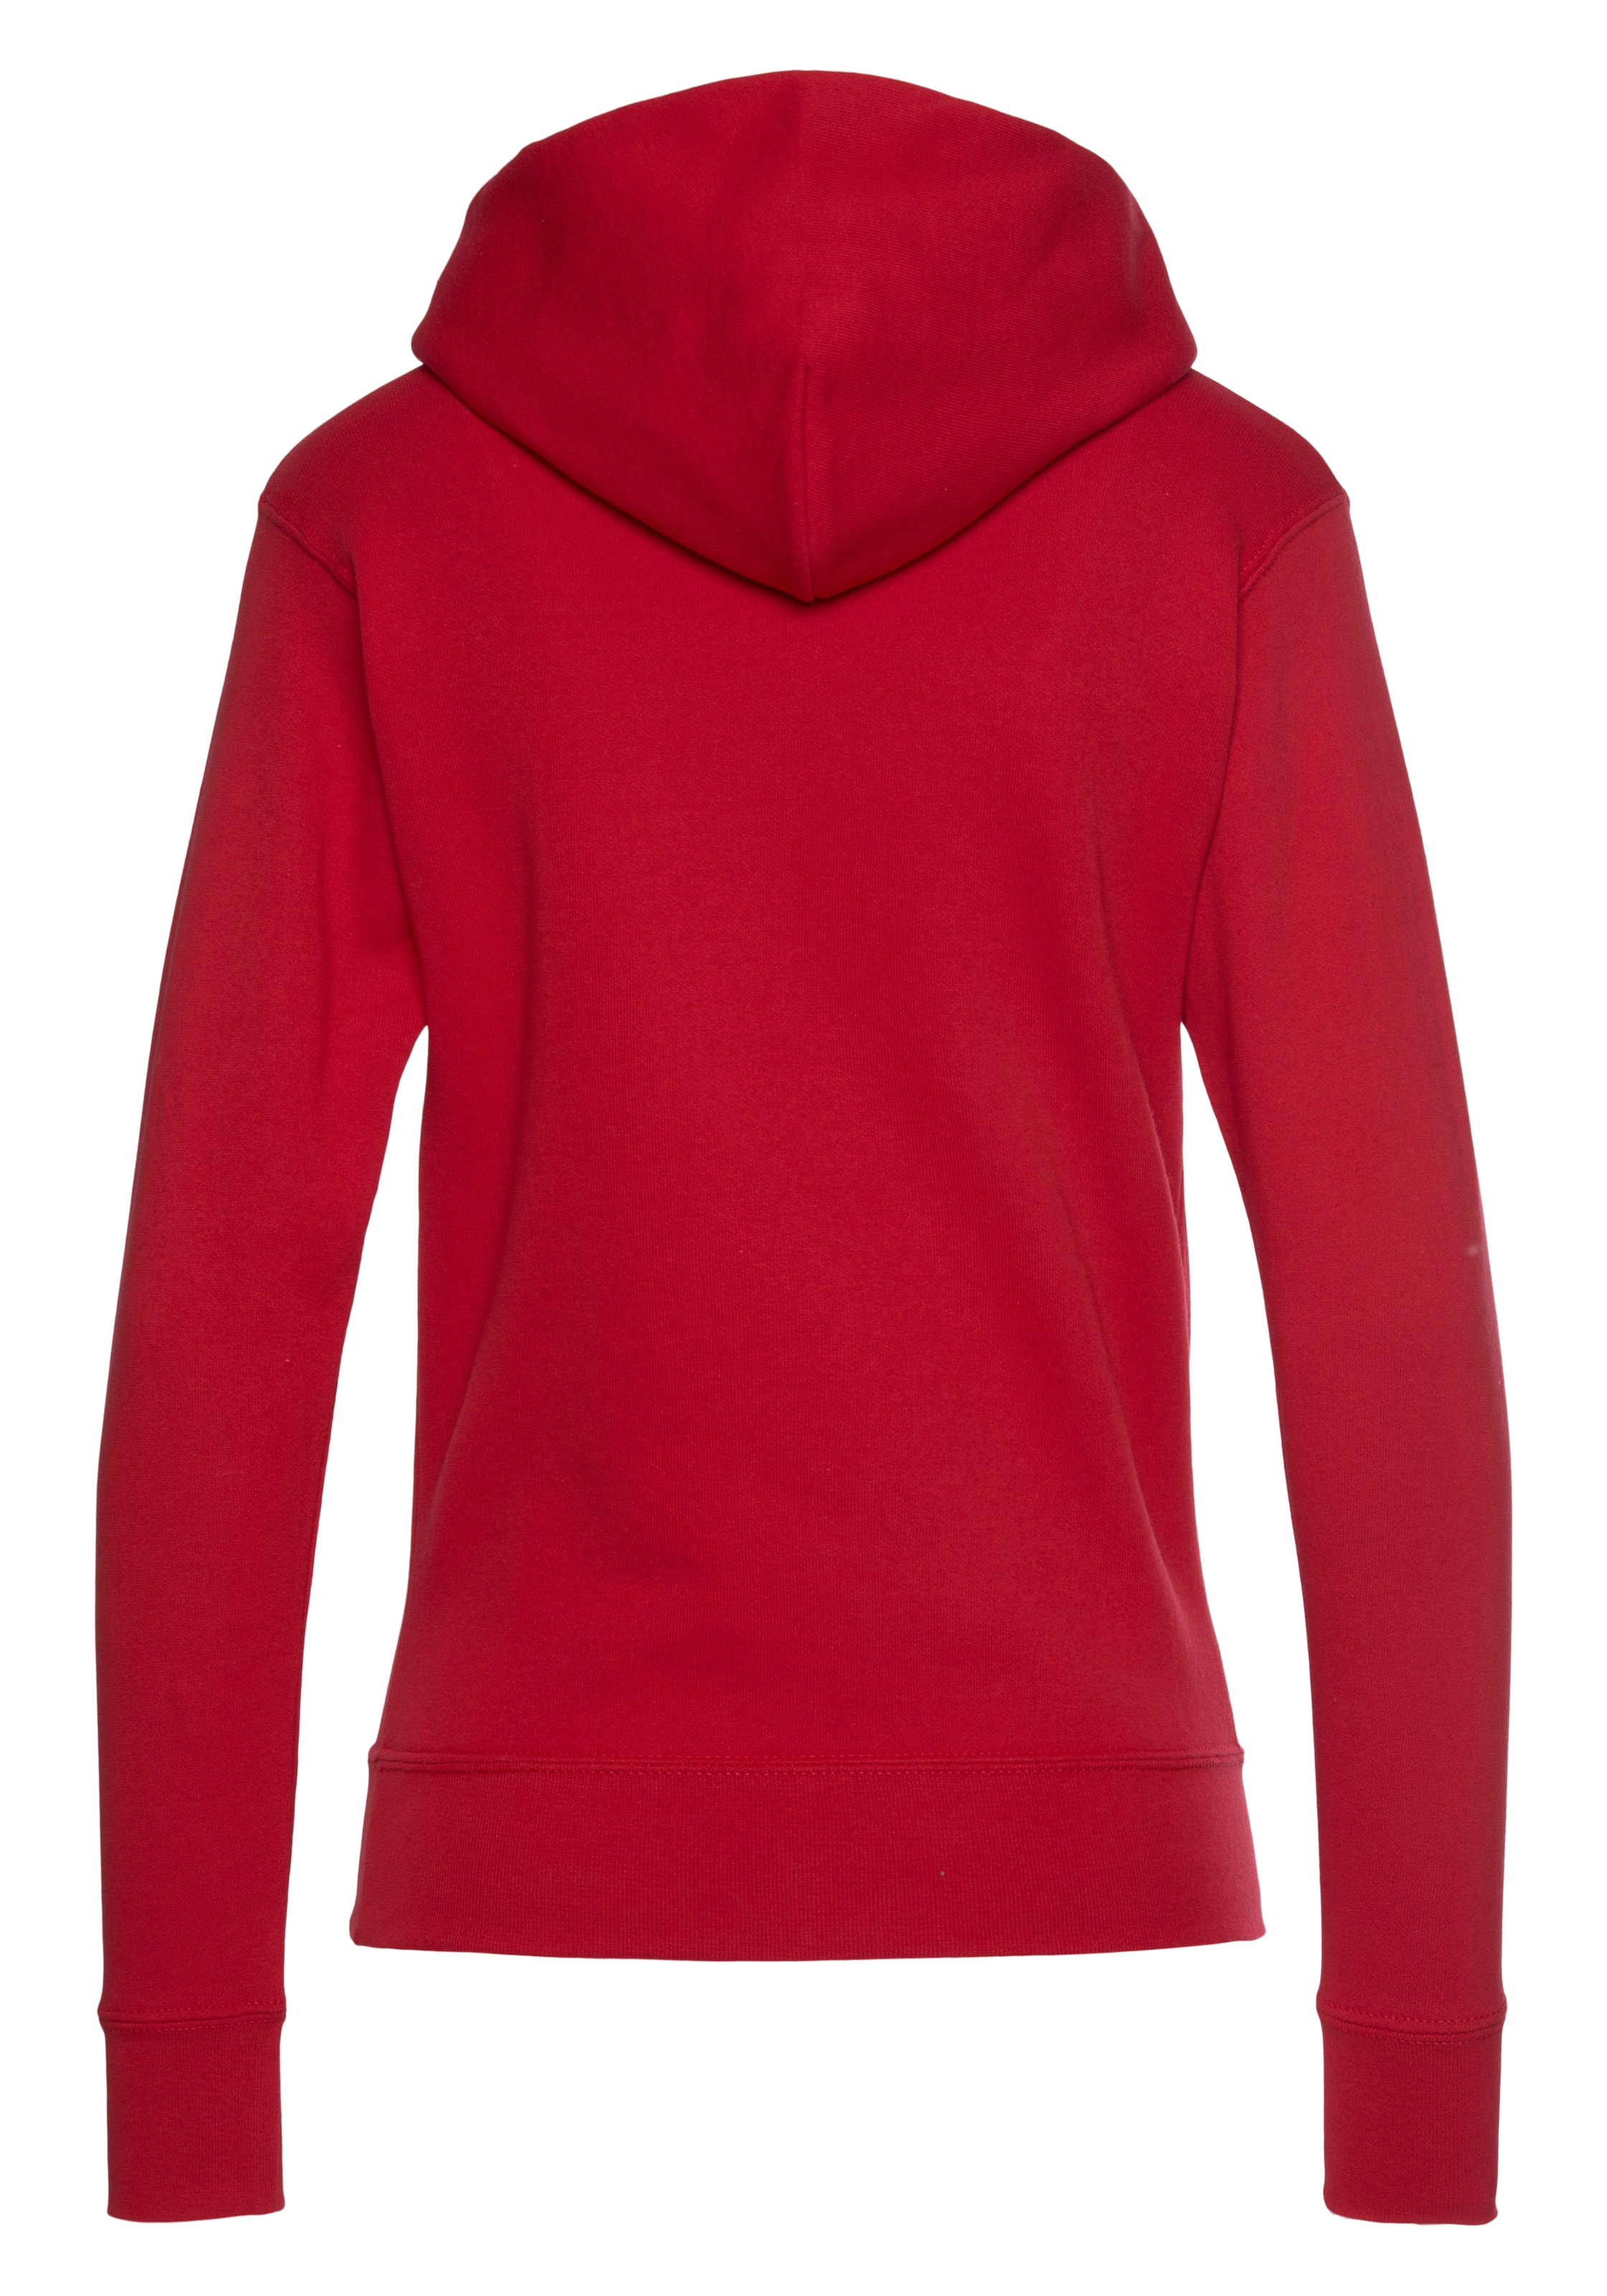 Sweatshirt Lady-Fit« of Fruit bei hooded »Classic the Loom Sweat OTTOversand